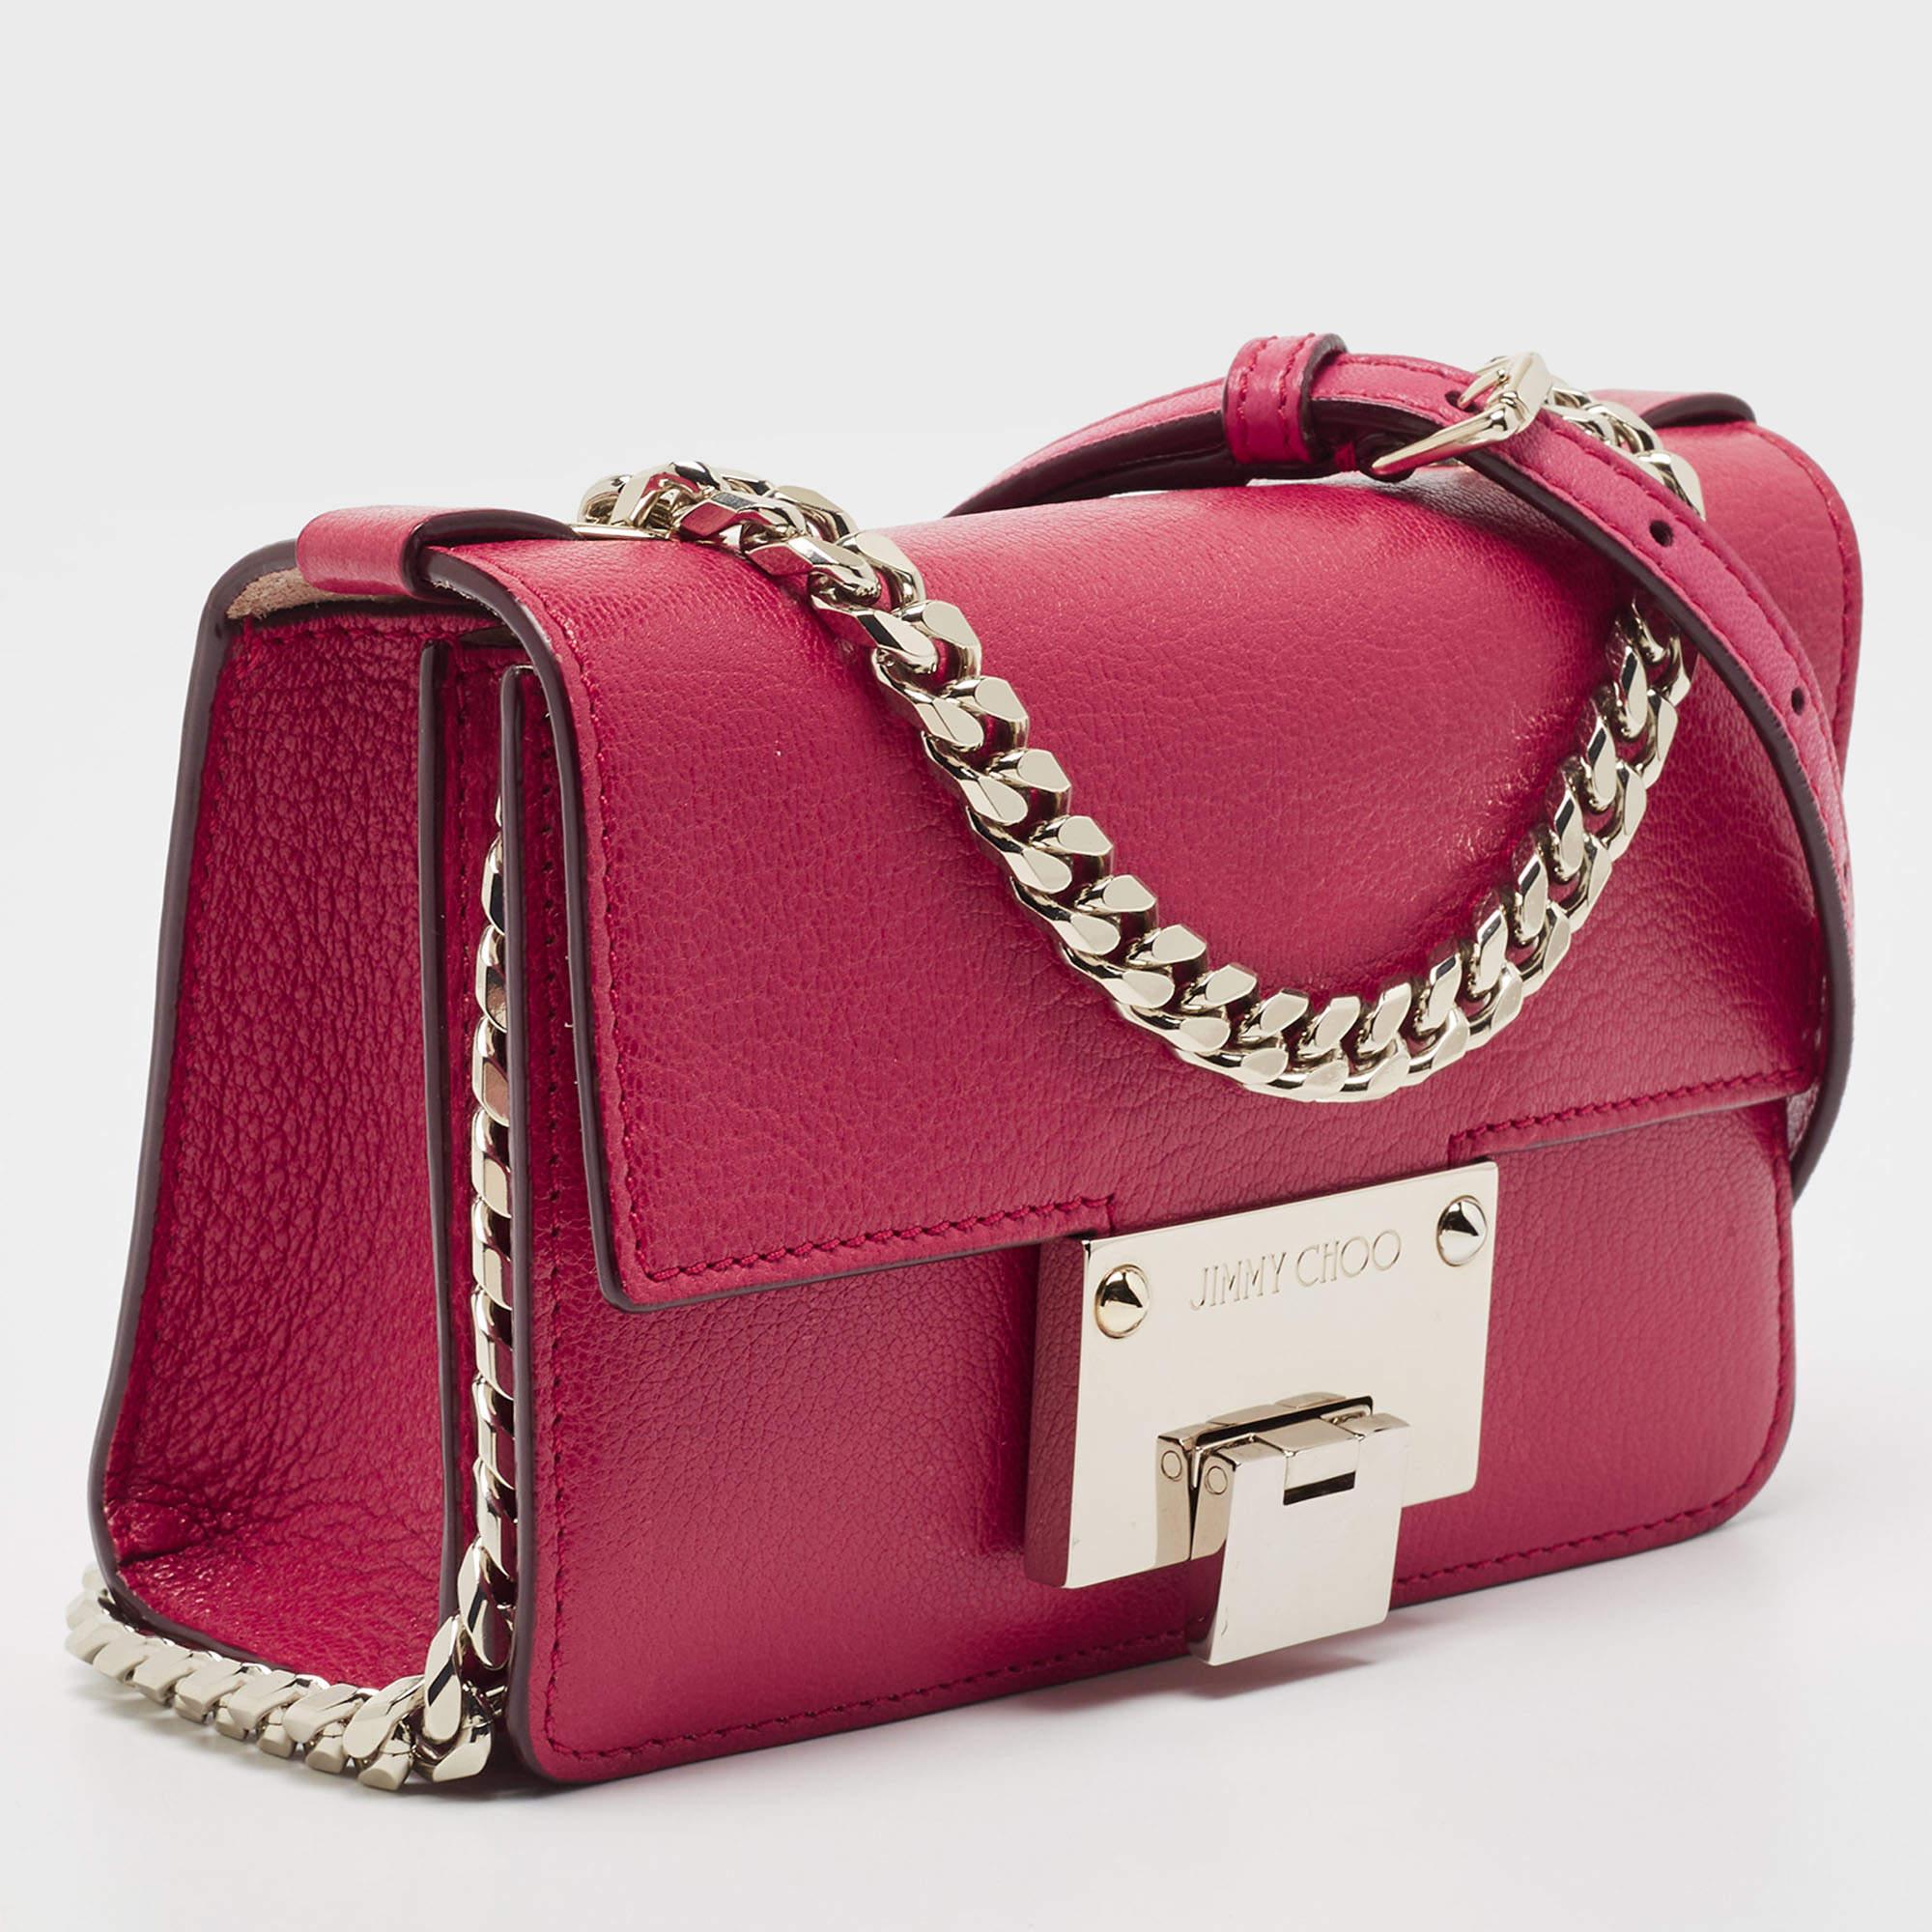 This stunning Rebel crossbody bag from Jimmy Choo is high on appeal and style. The bag is crafted from leather and designed with a flap that has a flip lock and leads way to a suede-lined interior. The bag is held by a top handle and an adjustable